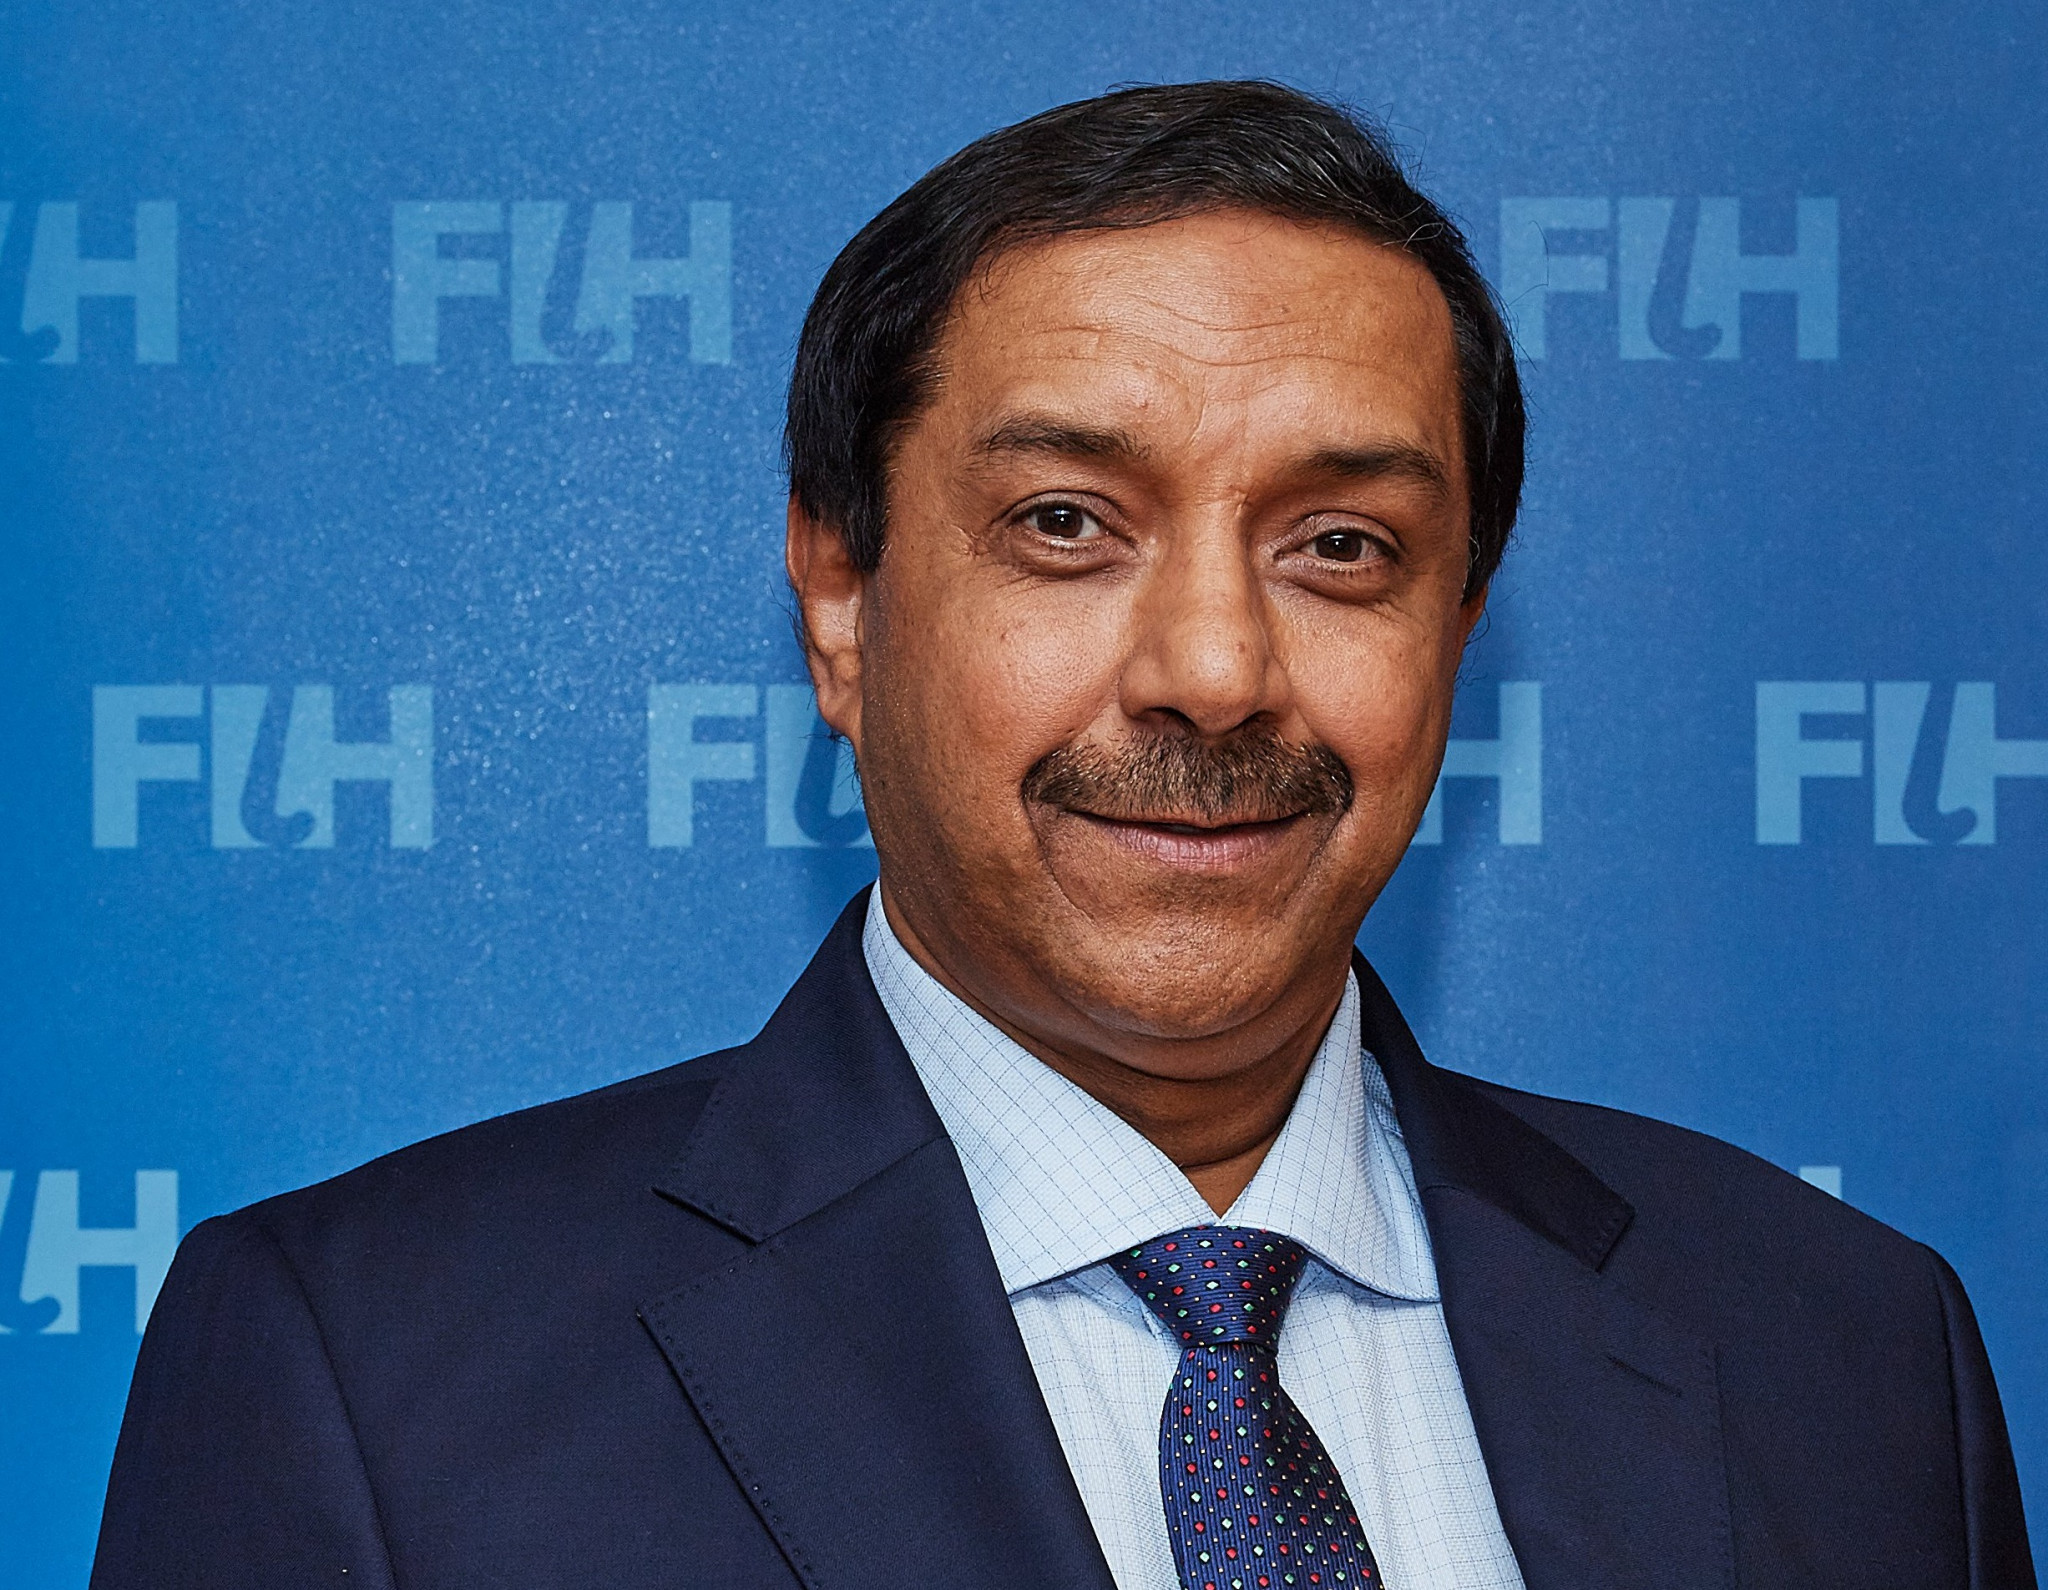 New FIH President Tayyab Ikram says the organisation must work more closely with its National Associations ©FIH